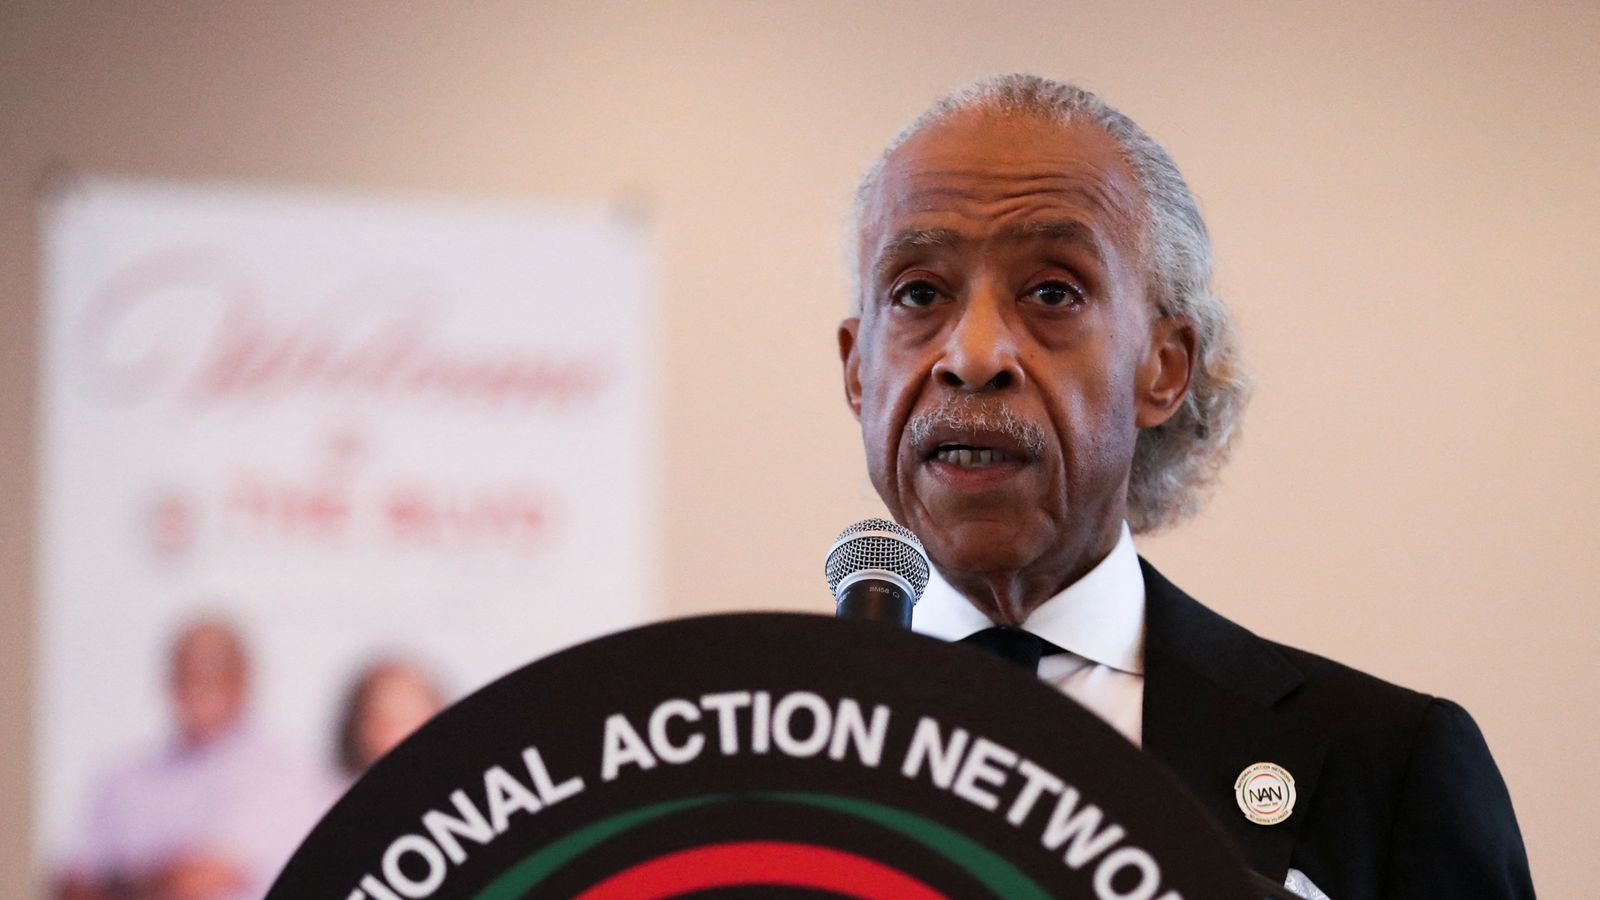 US civil rights leader Al Sharpton calls for an end to stop and search in UK